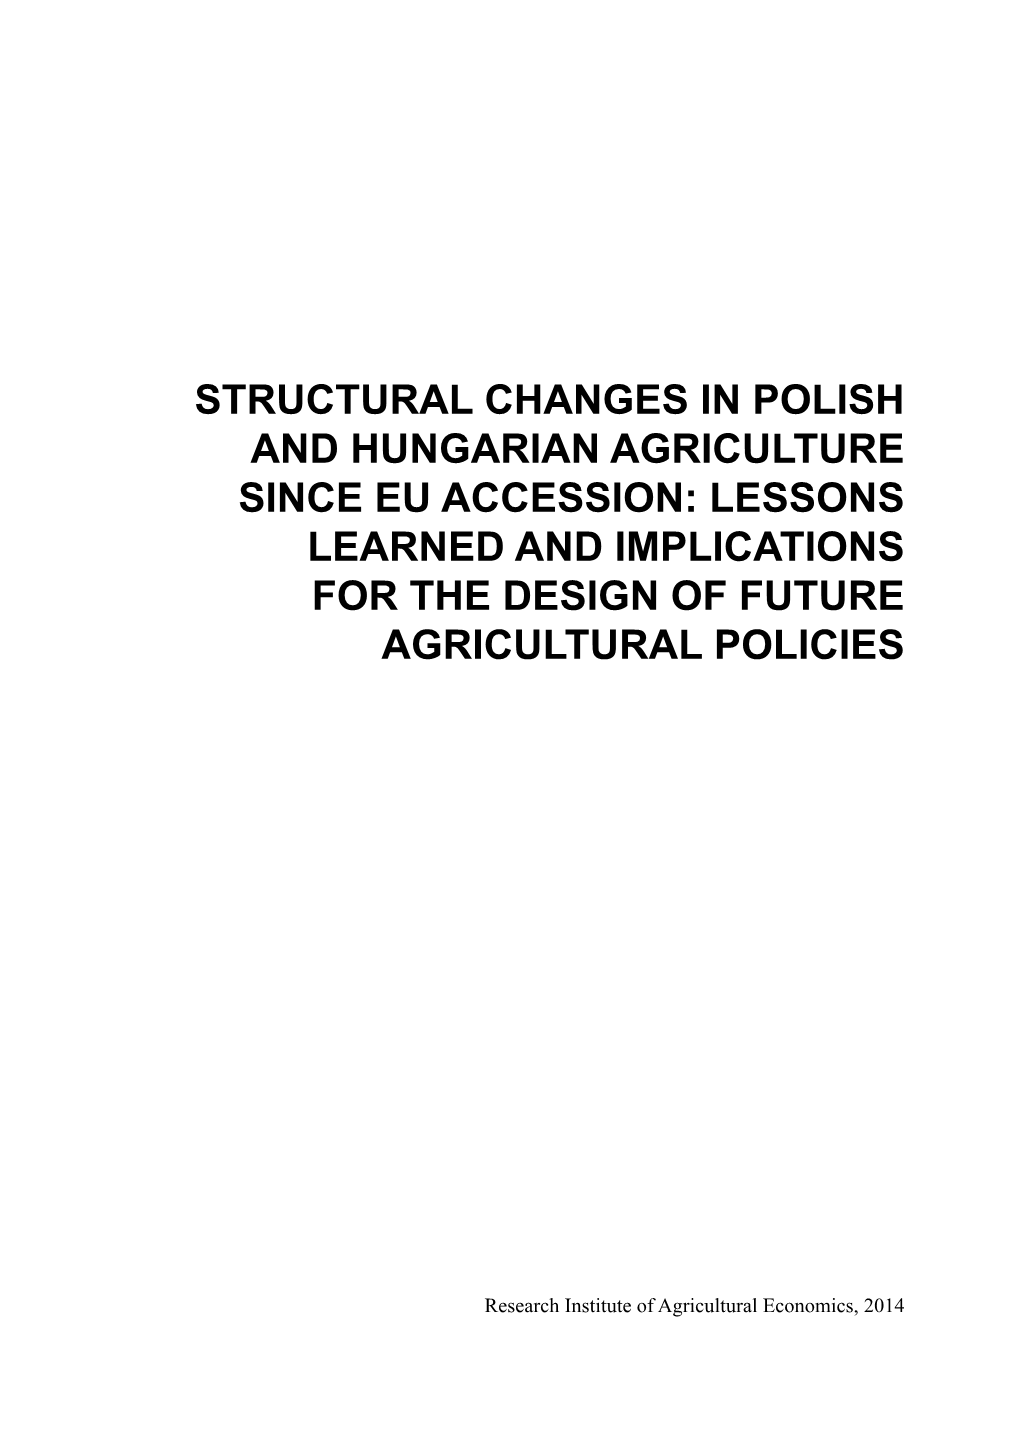 Structural Changes in Polish and Hungarian Agriculture Since Eu Accession: Lessons Learned and Implications for the Design of Future Agricultural Policies